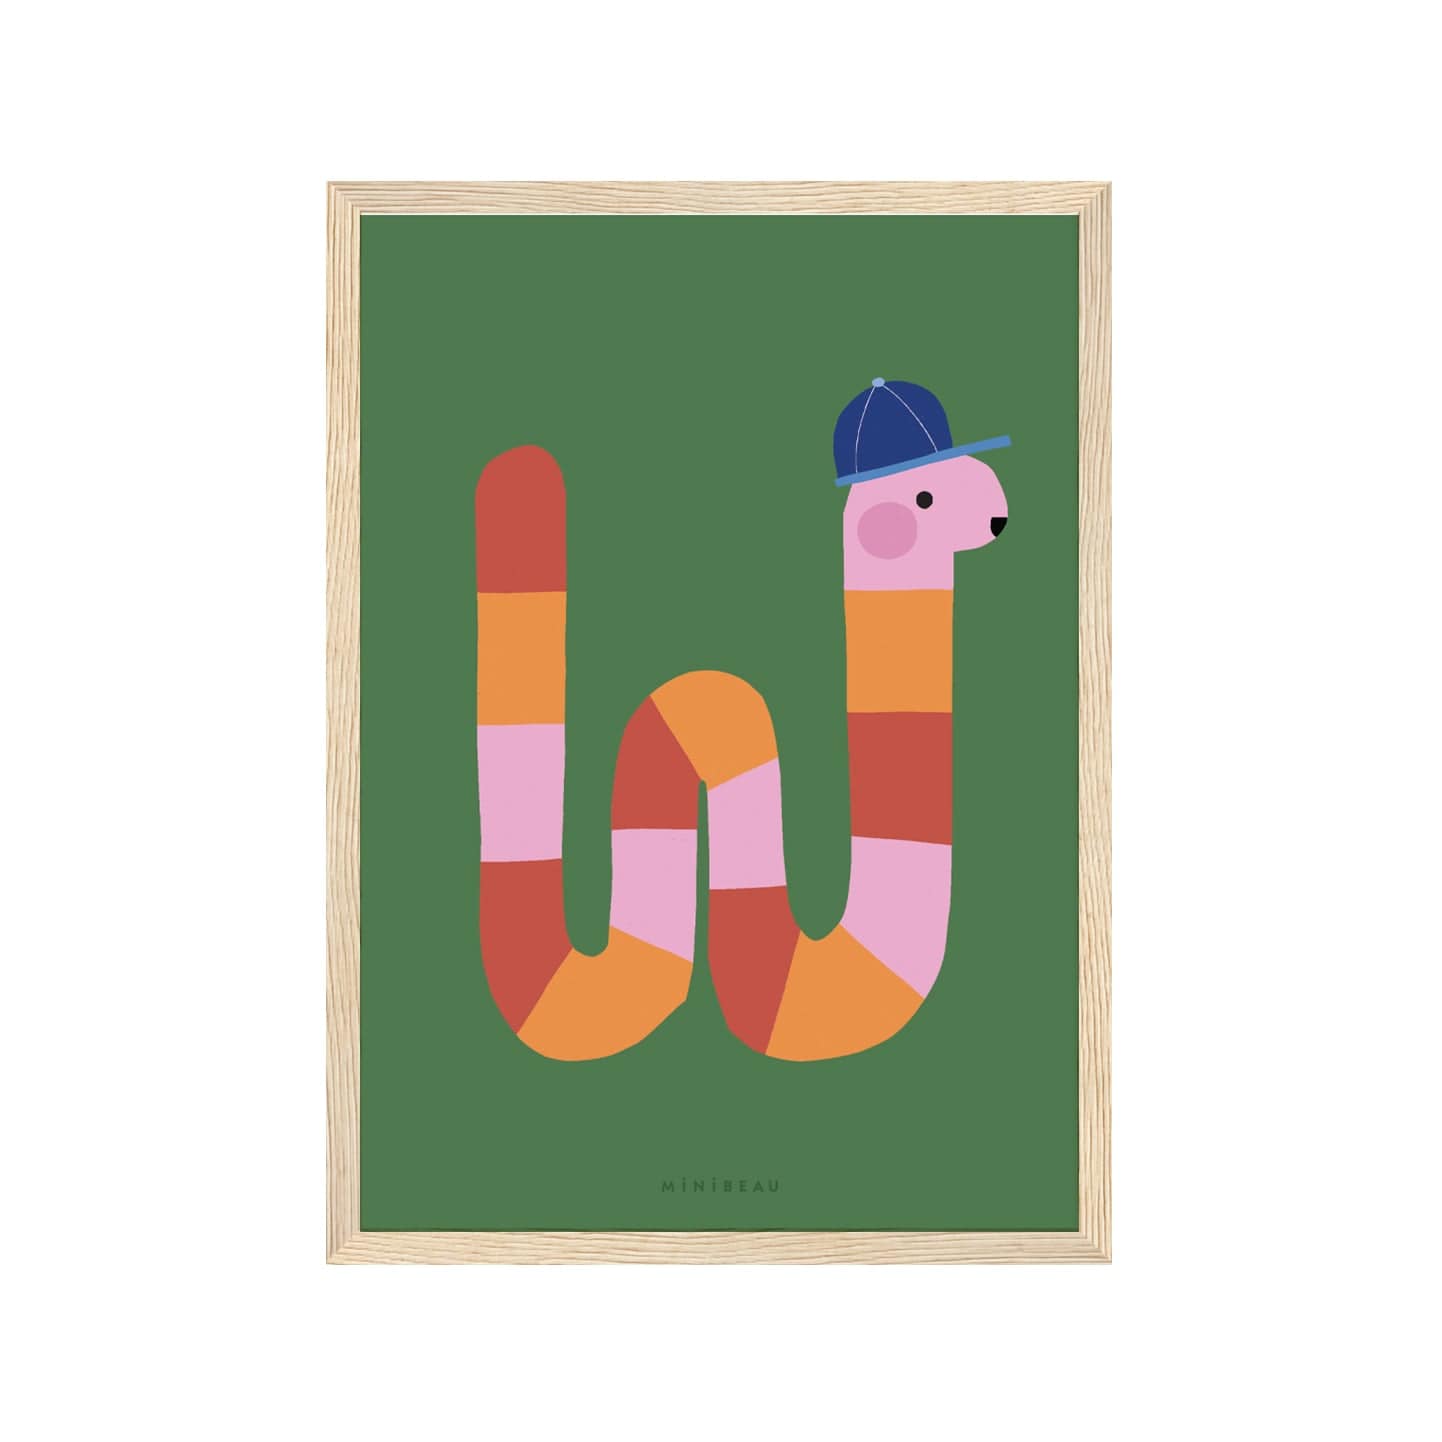 Art print in a light wood frame. Our Happy Alphabet 'W' Art Print shows a pink, red and orange wriggly worm in the shape of a W. The worm is wearing a blue baseball cap and is on a green background.